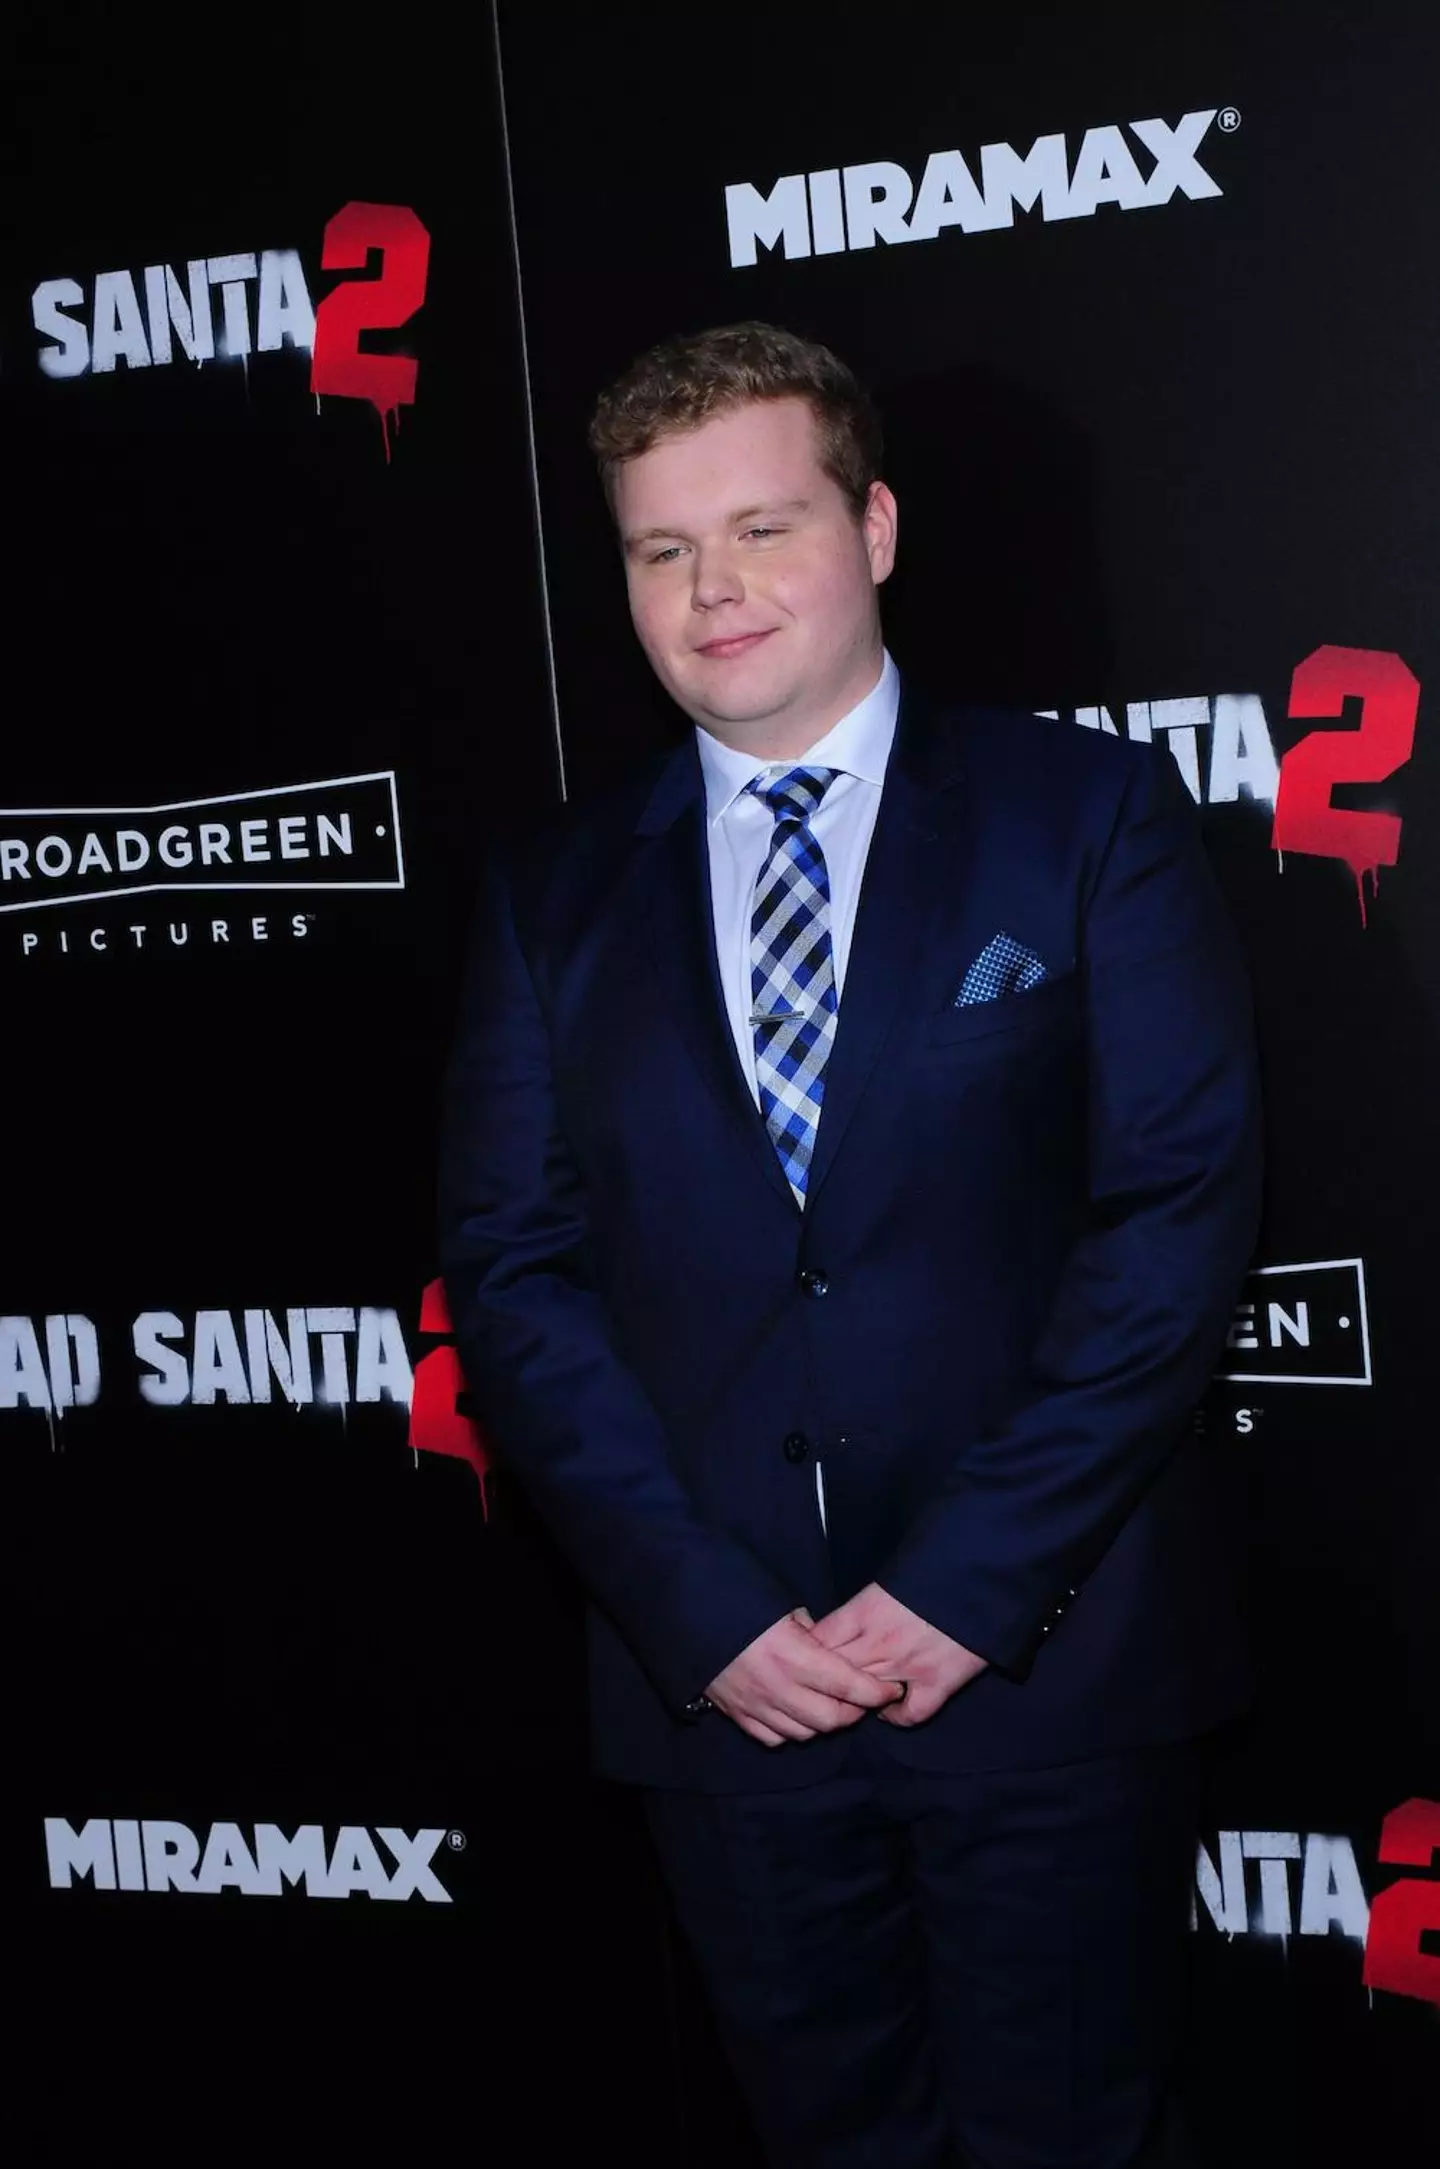 Brett Kelly said his life was 'extremely normal' after the first Bad Santa film.